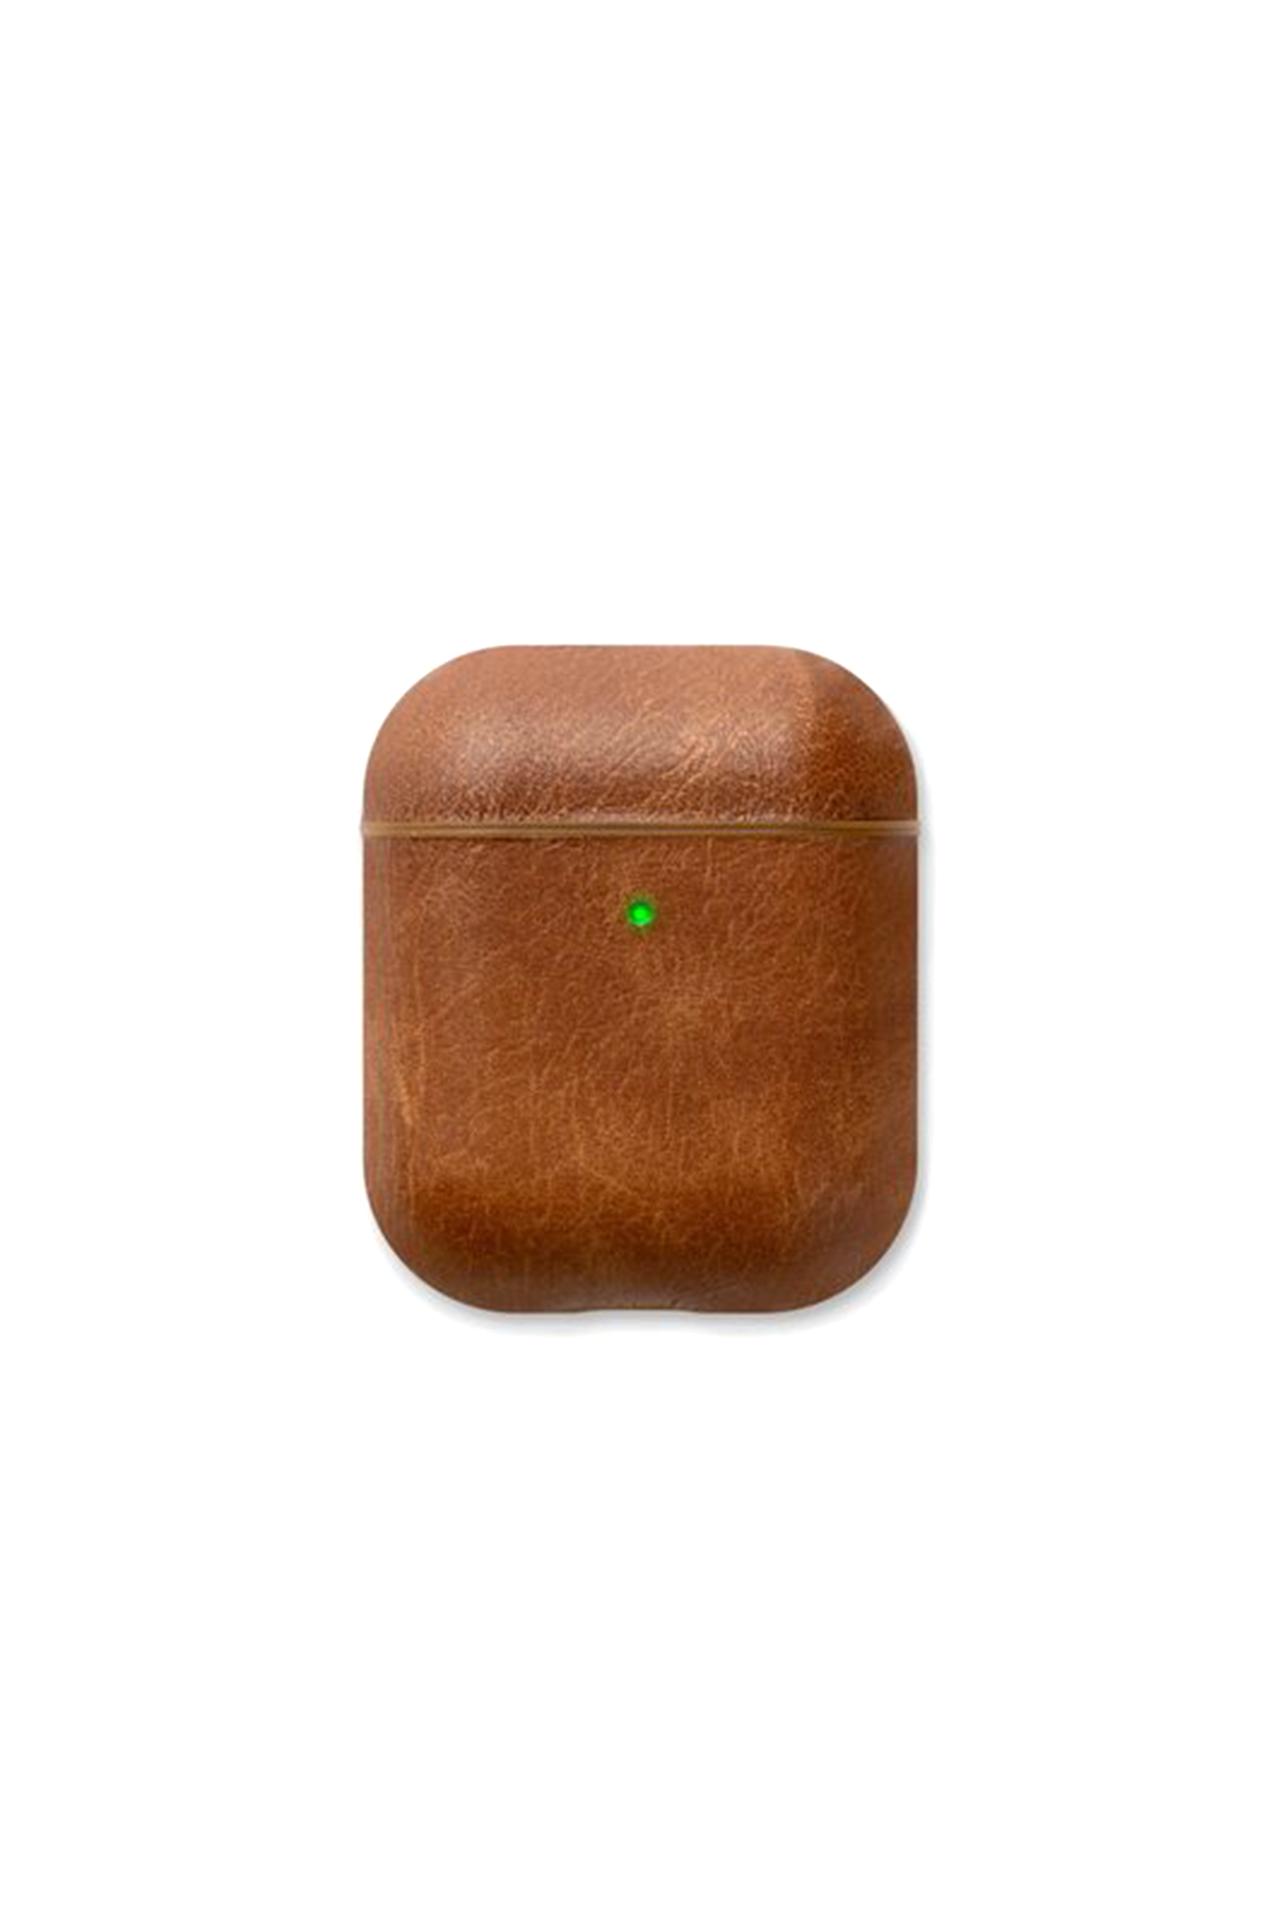 Courant Airpods Leather Case Brown Front Image (6604412944499)